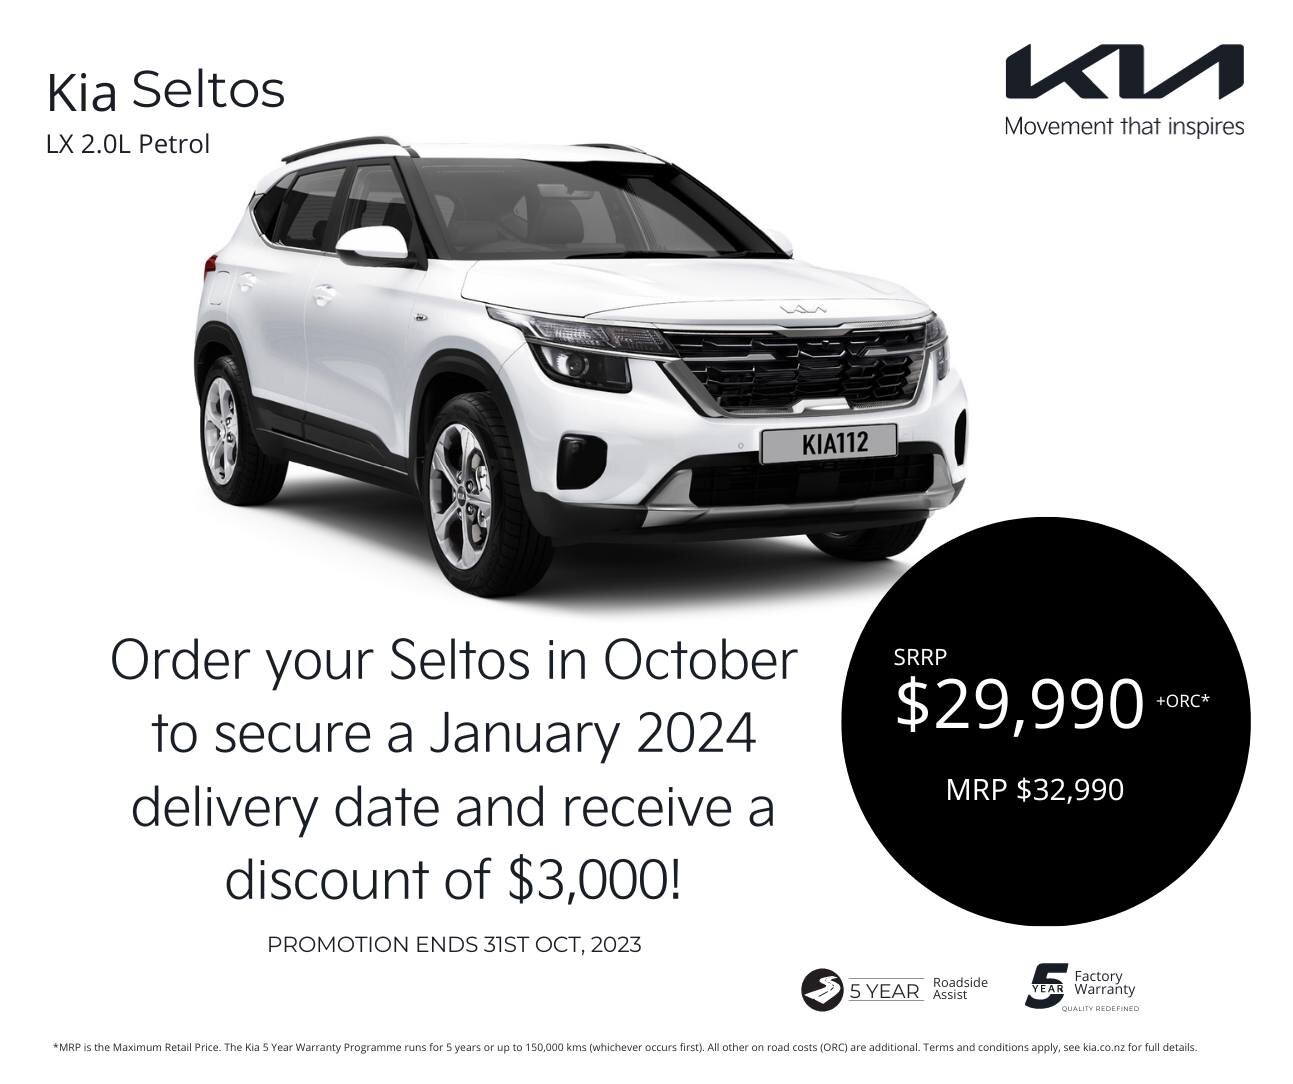 Order your Seltos in October to secure a January 2024 delivery date and receive a discount of $3,000!